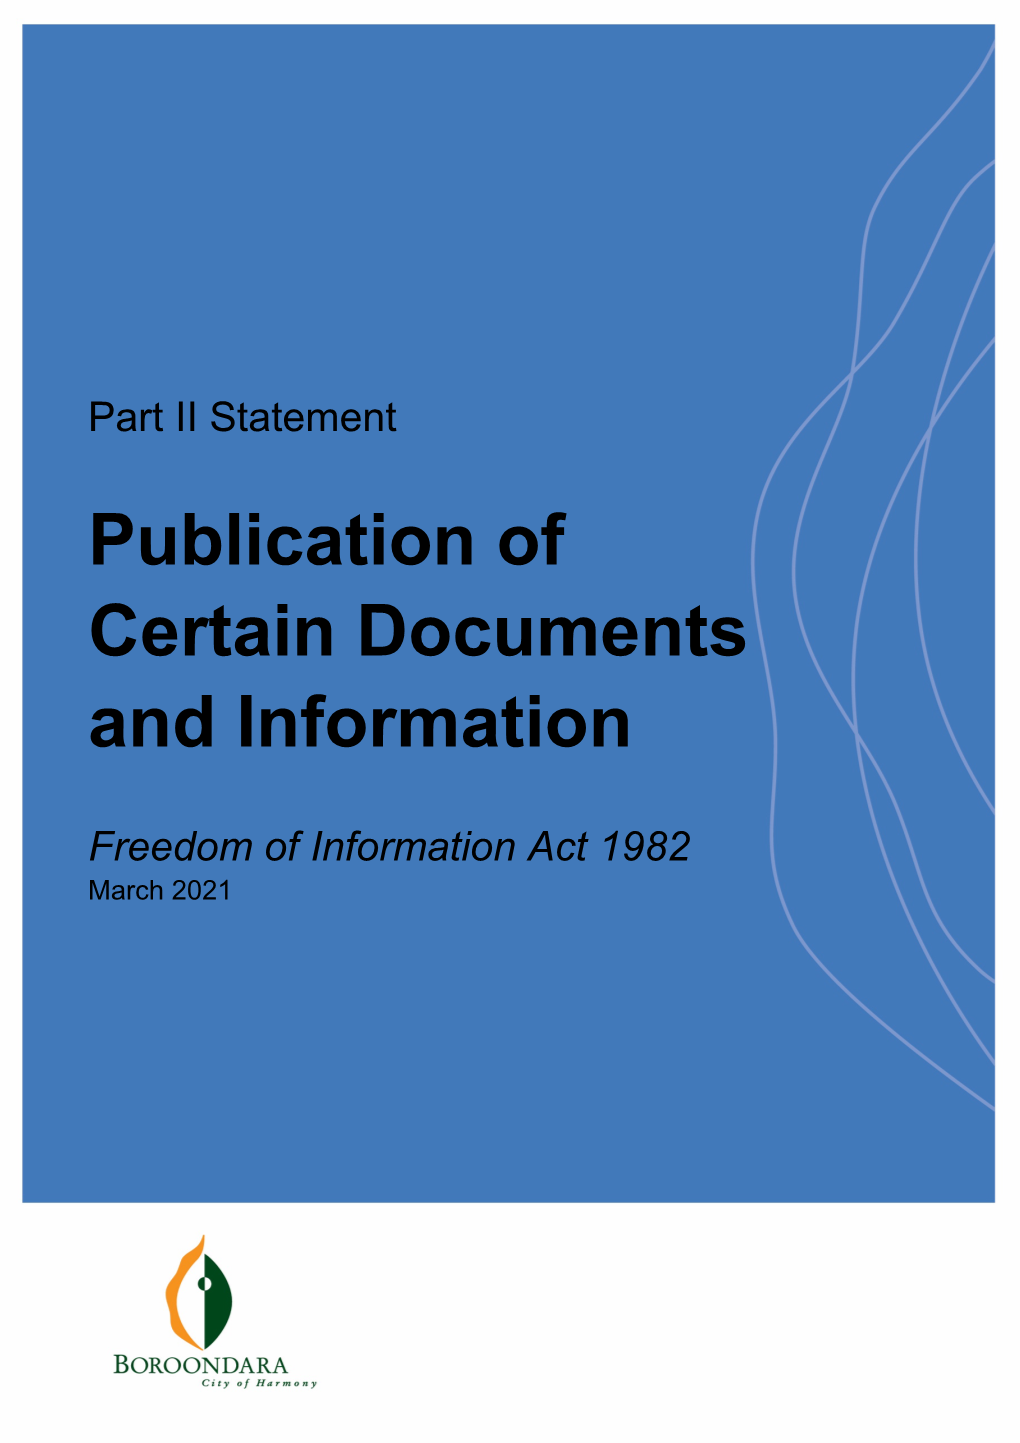 Publication of Certain Documents and Information